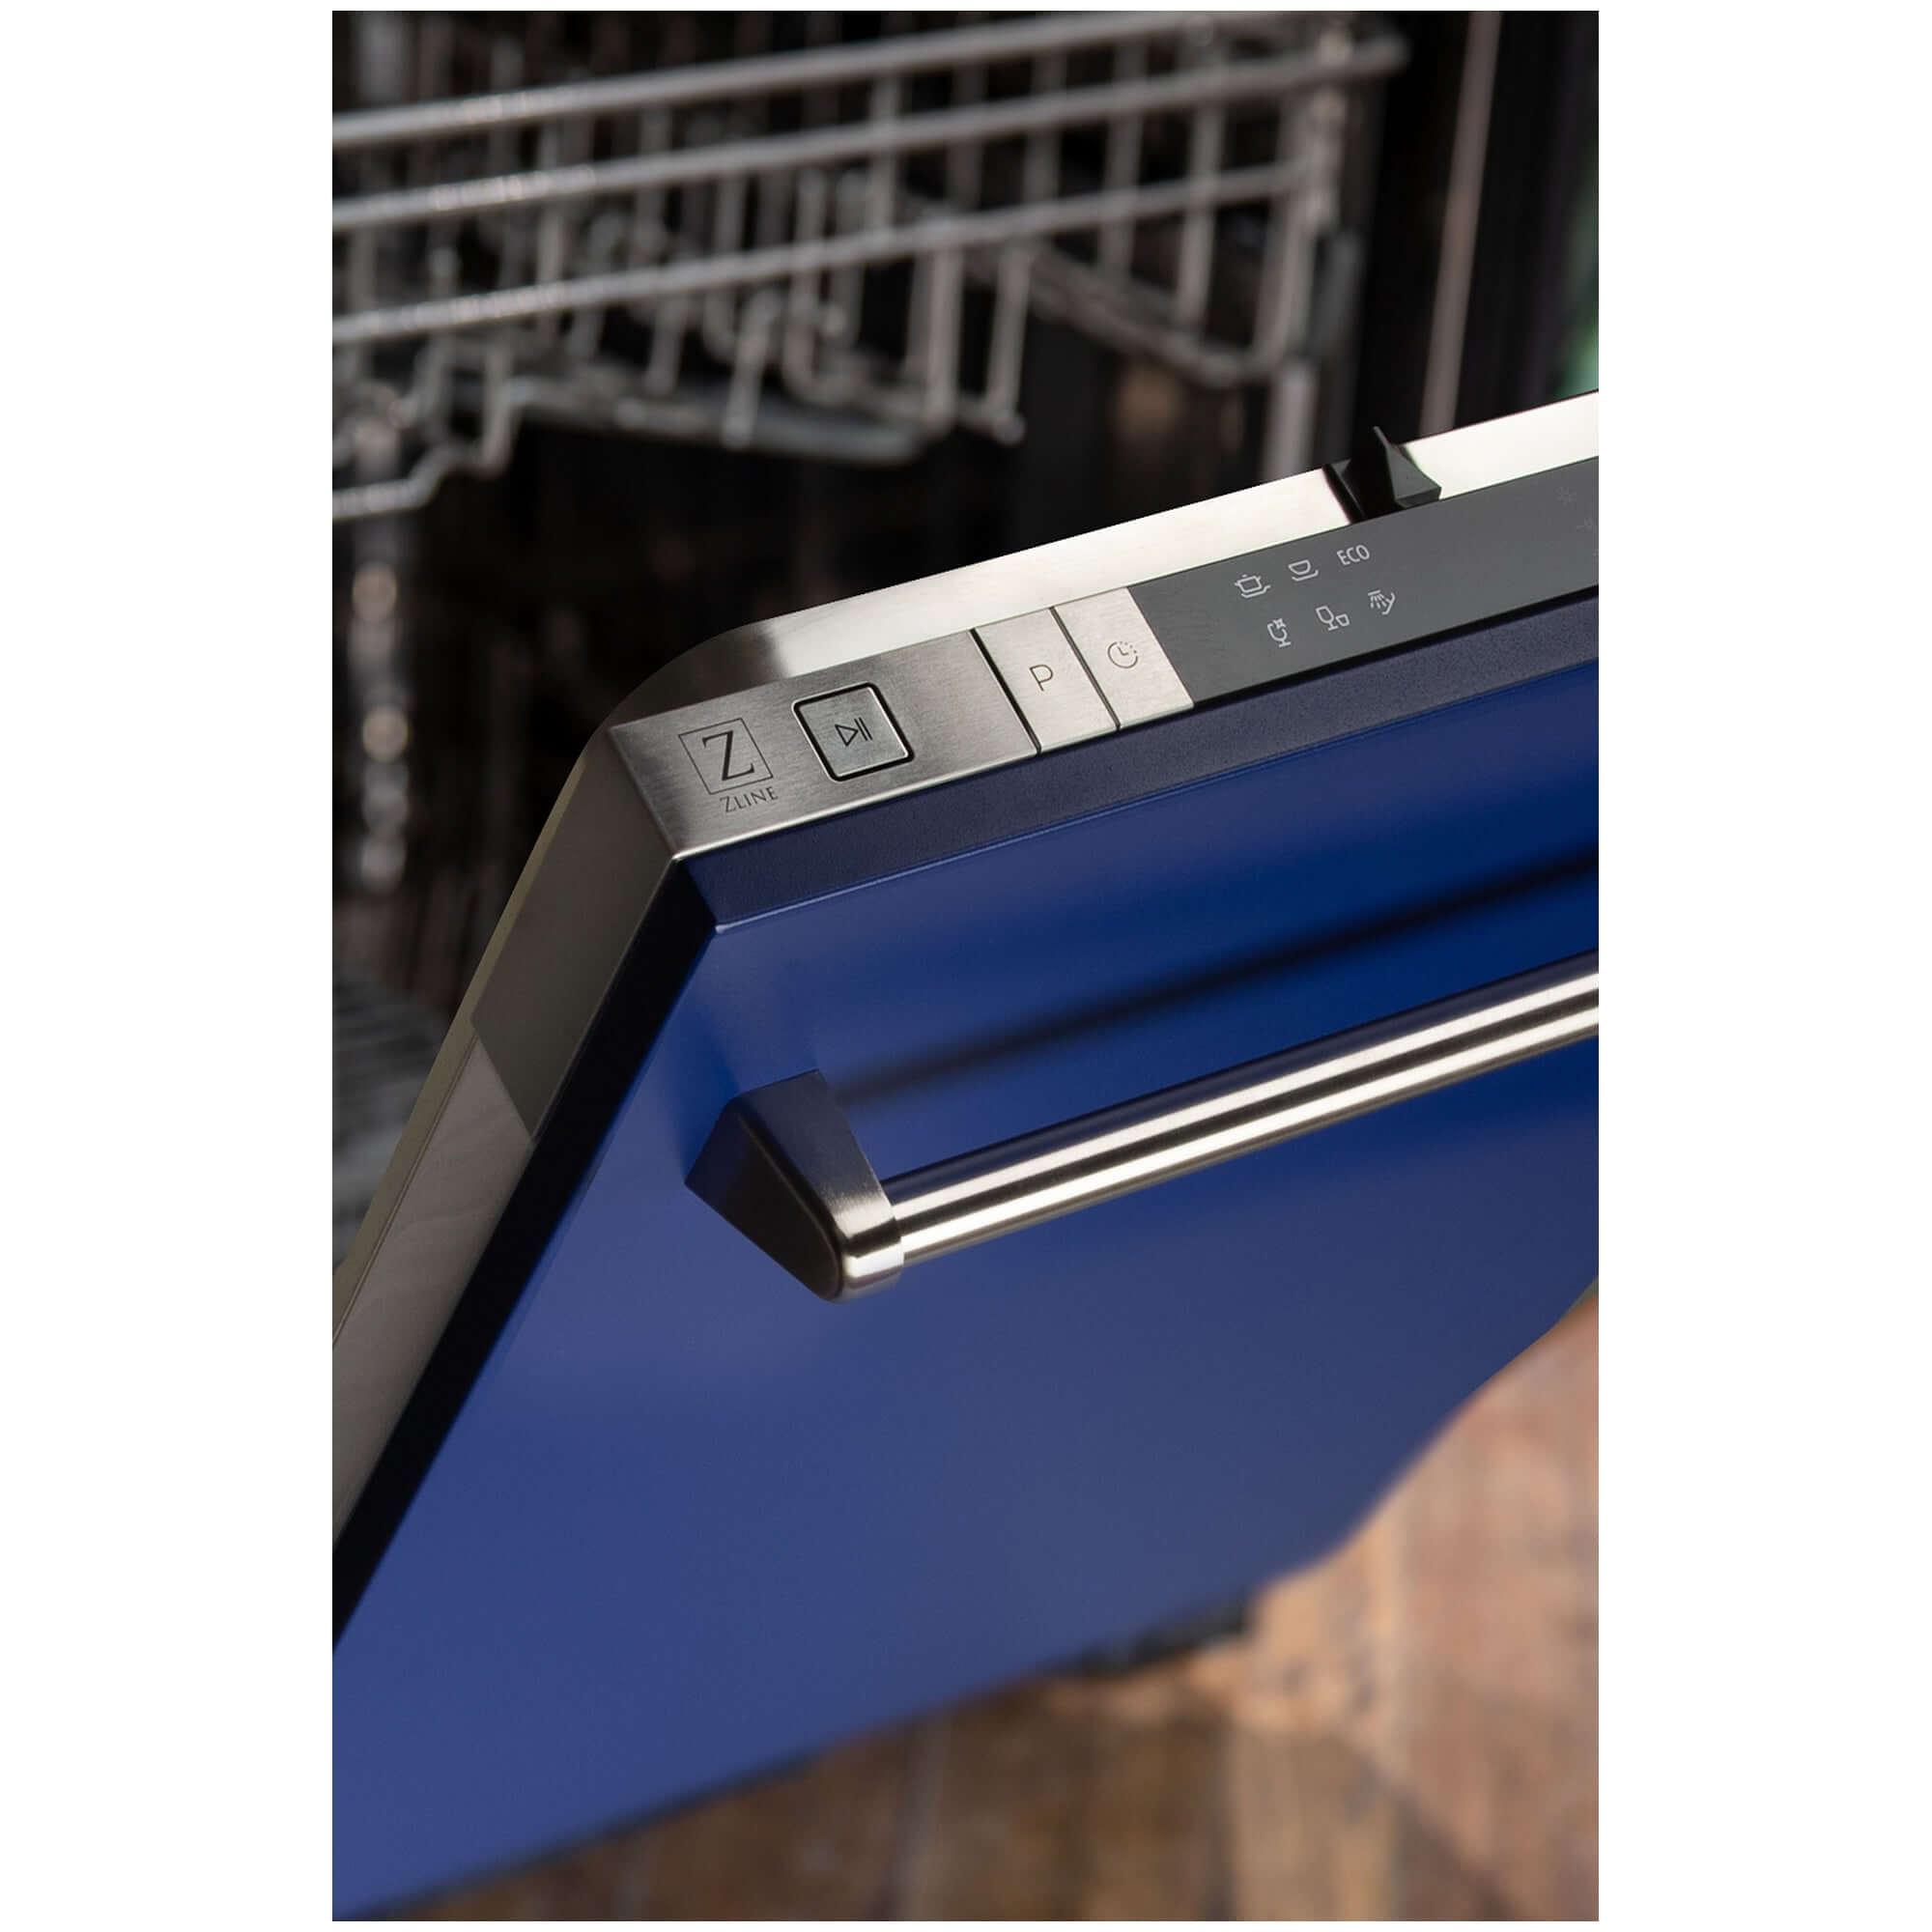 ZLINE 18 in. Compact Blue Matte Top Control Built-In Dishwasher with Stainless Steel Tub and Traditional Style Handle, 52dBa (DW-BM-18)